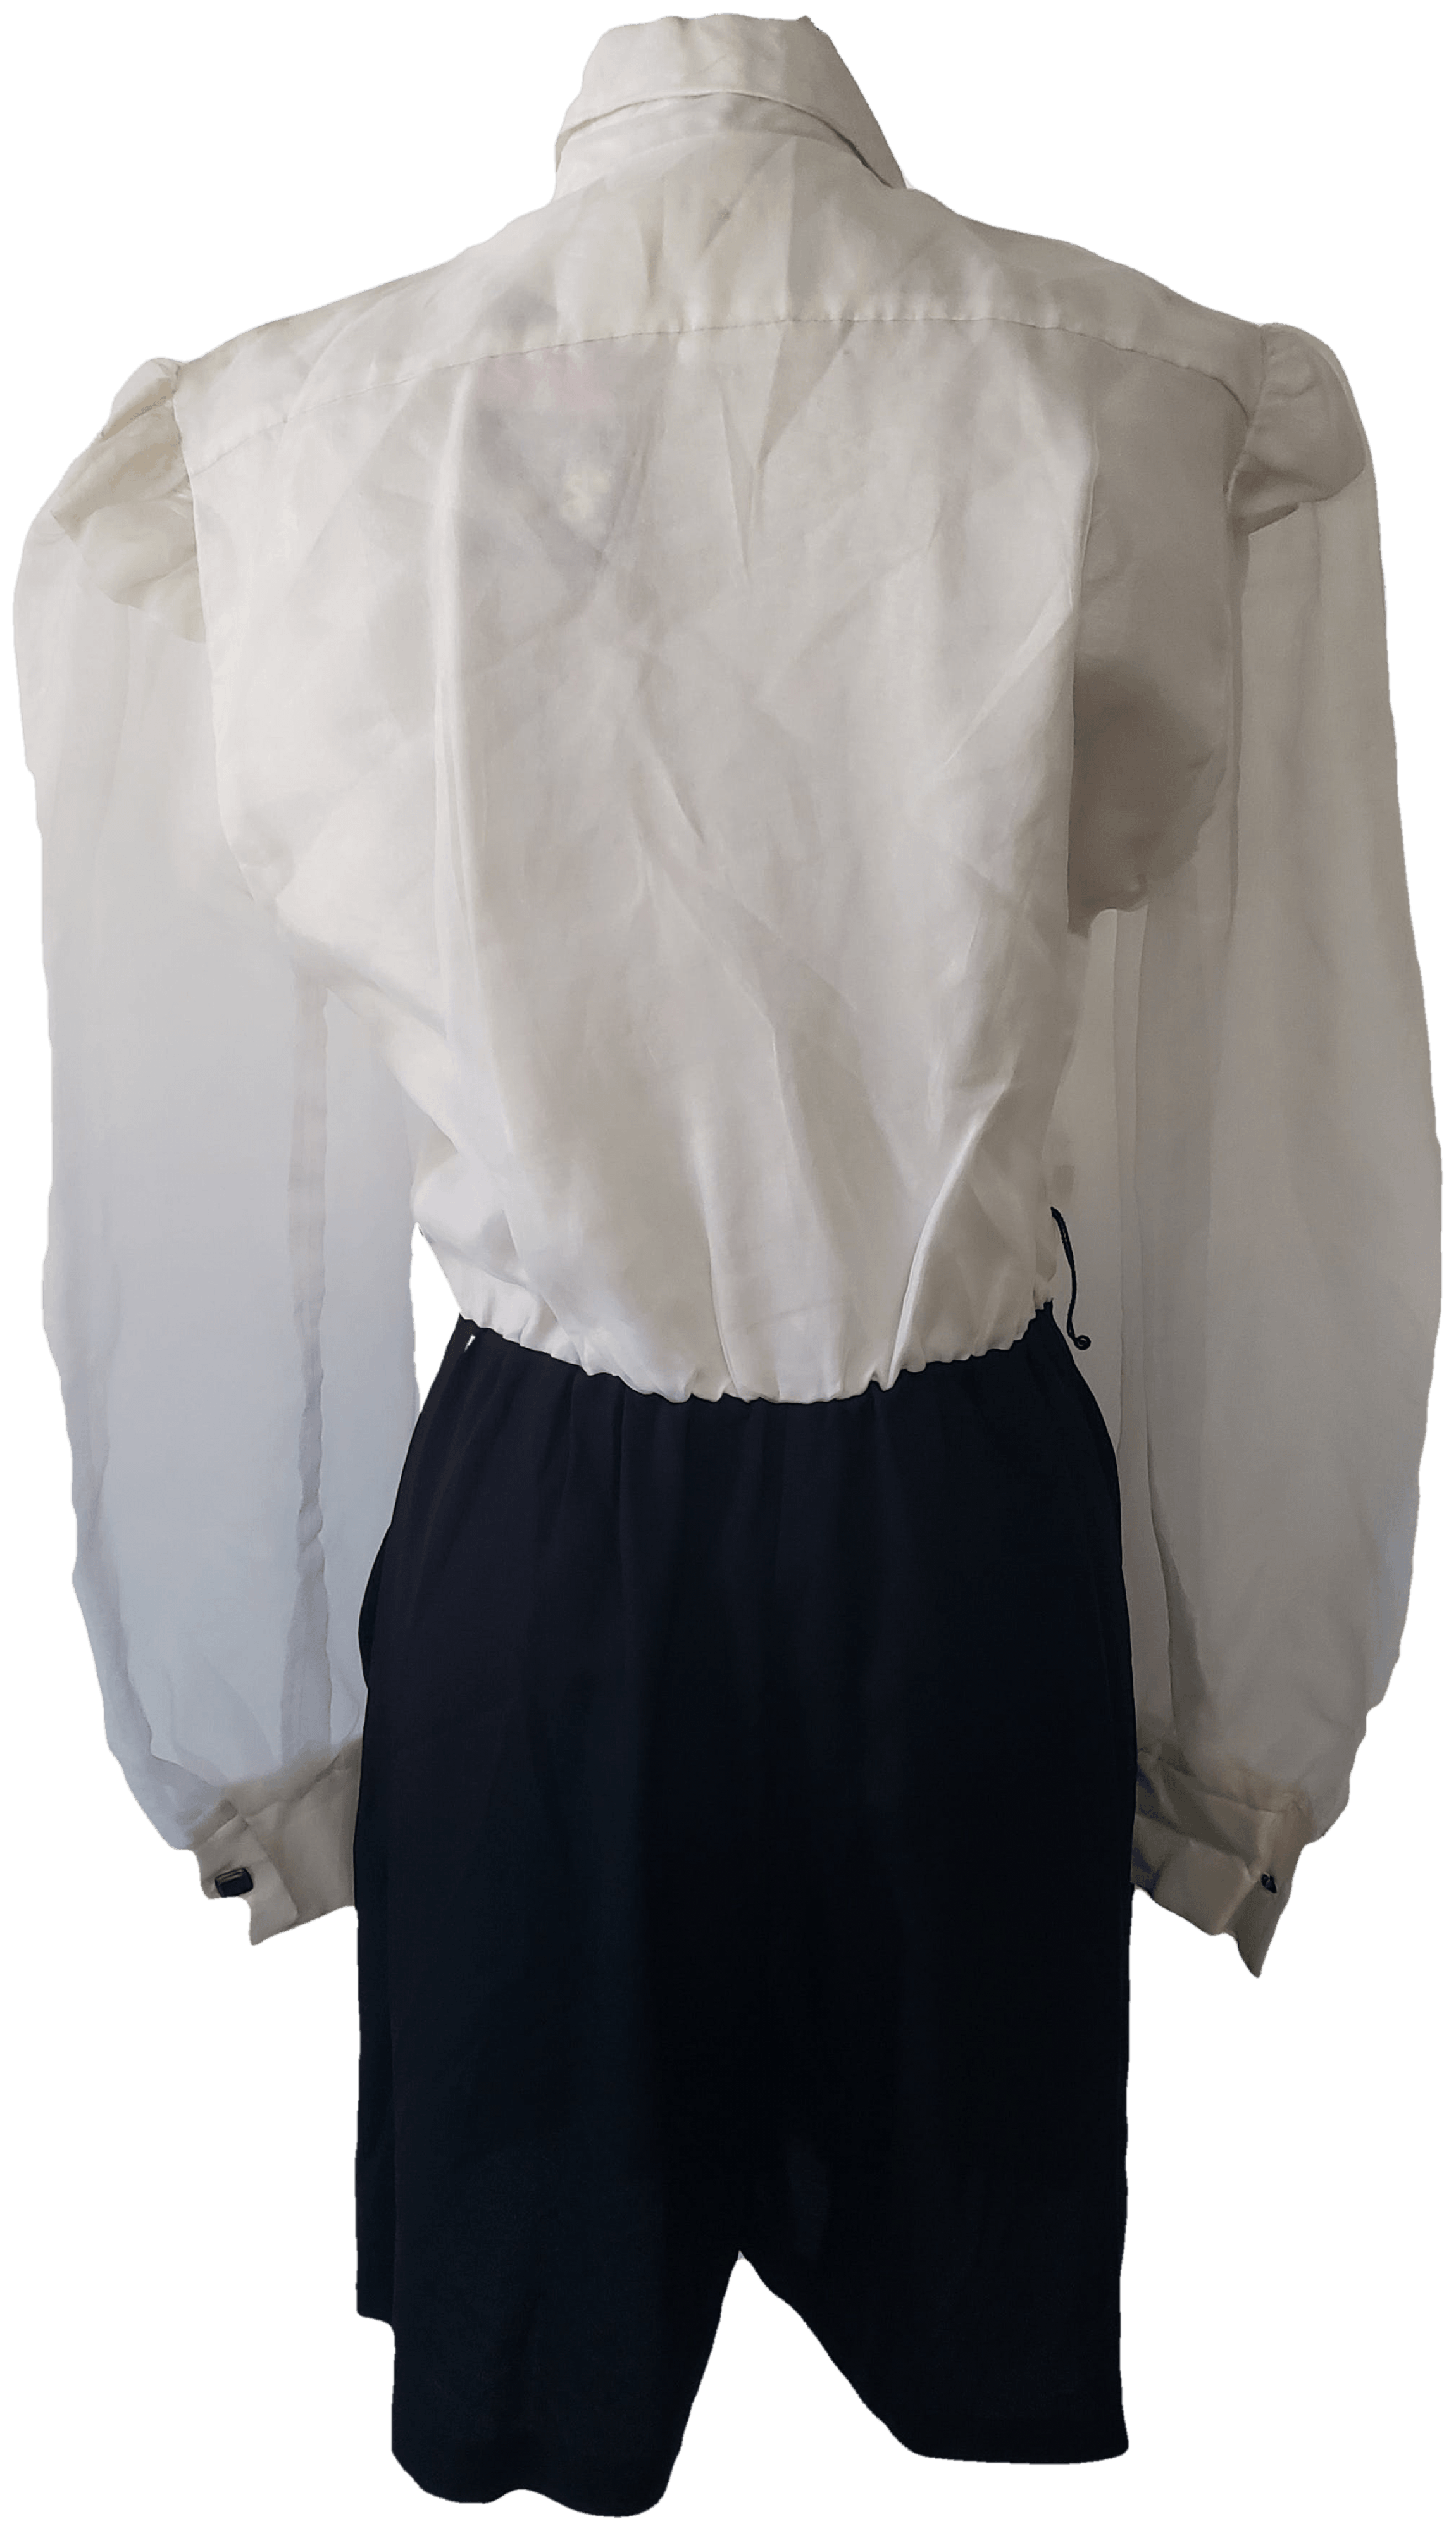 Vintage Sheer White Shirt with Ruffled Collar and Black Shorts by ...